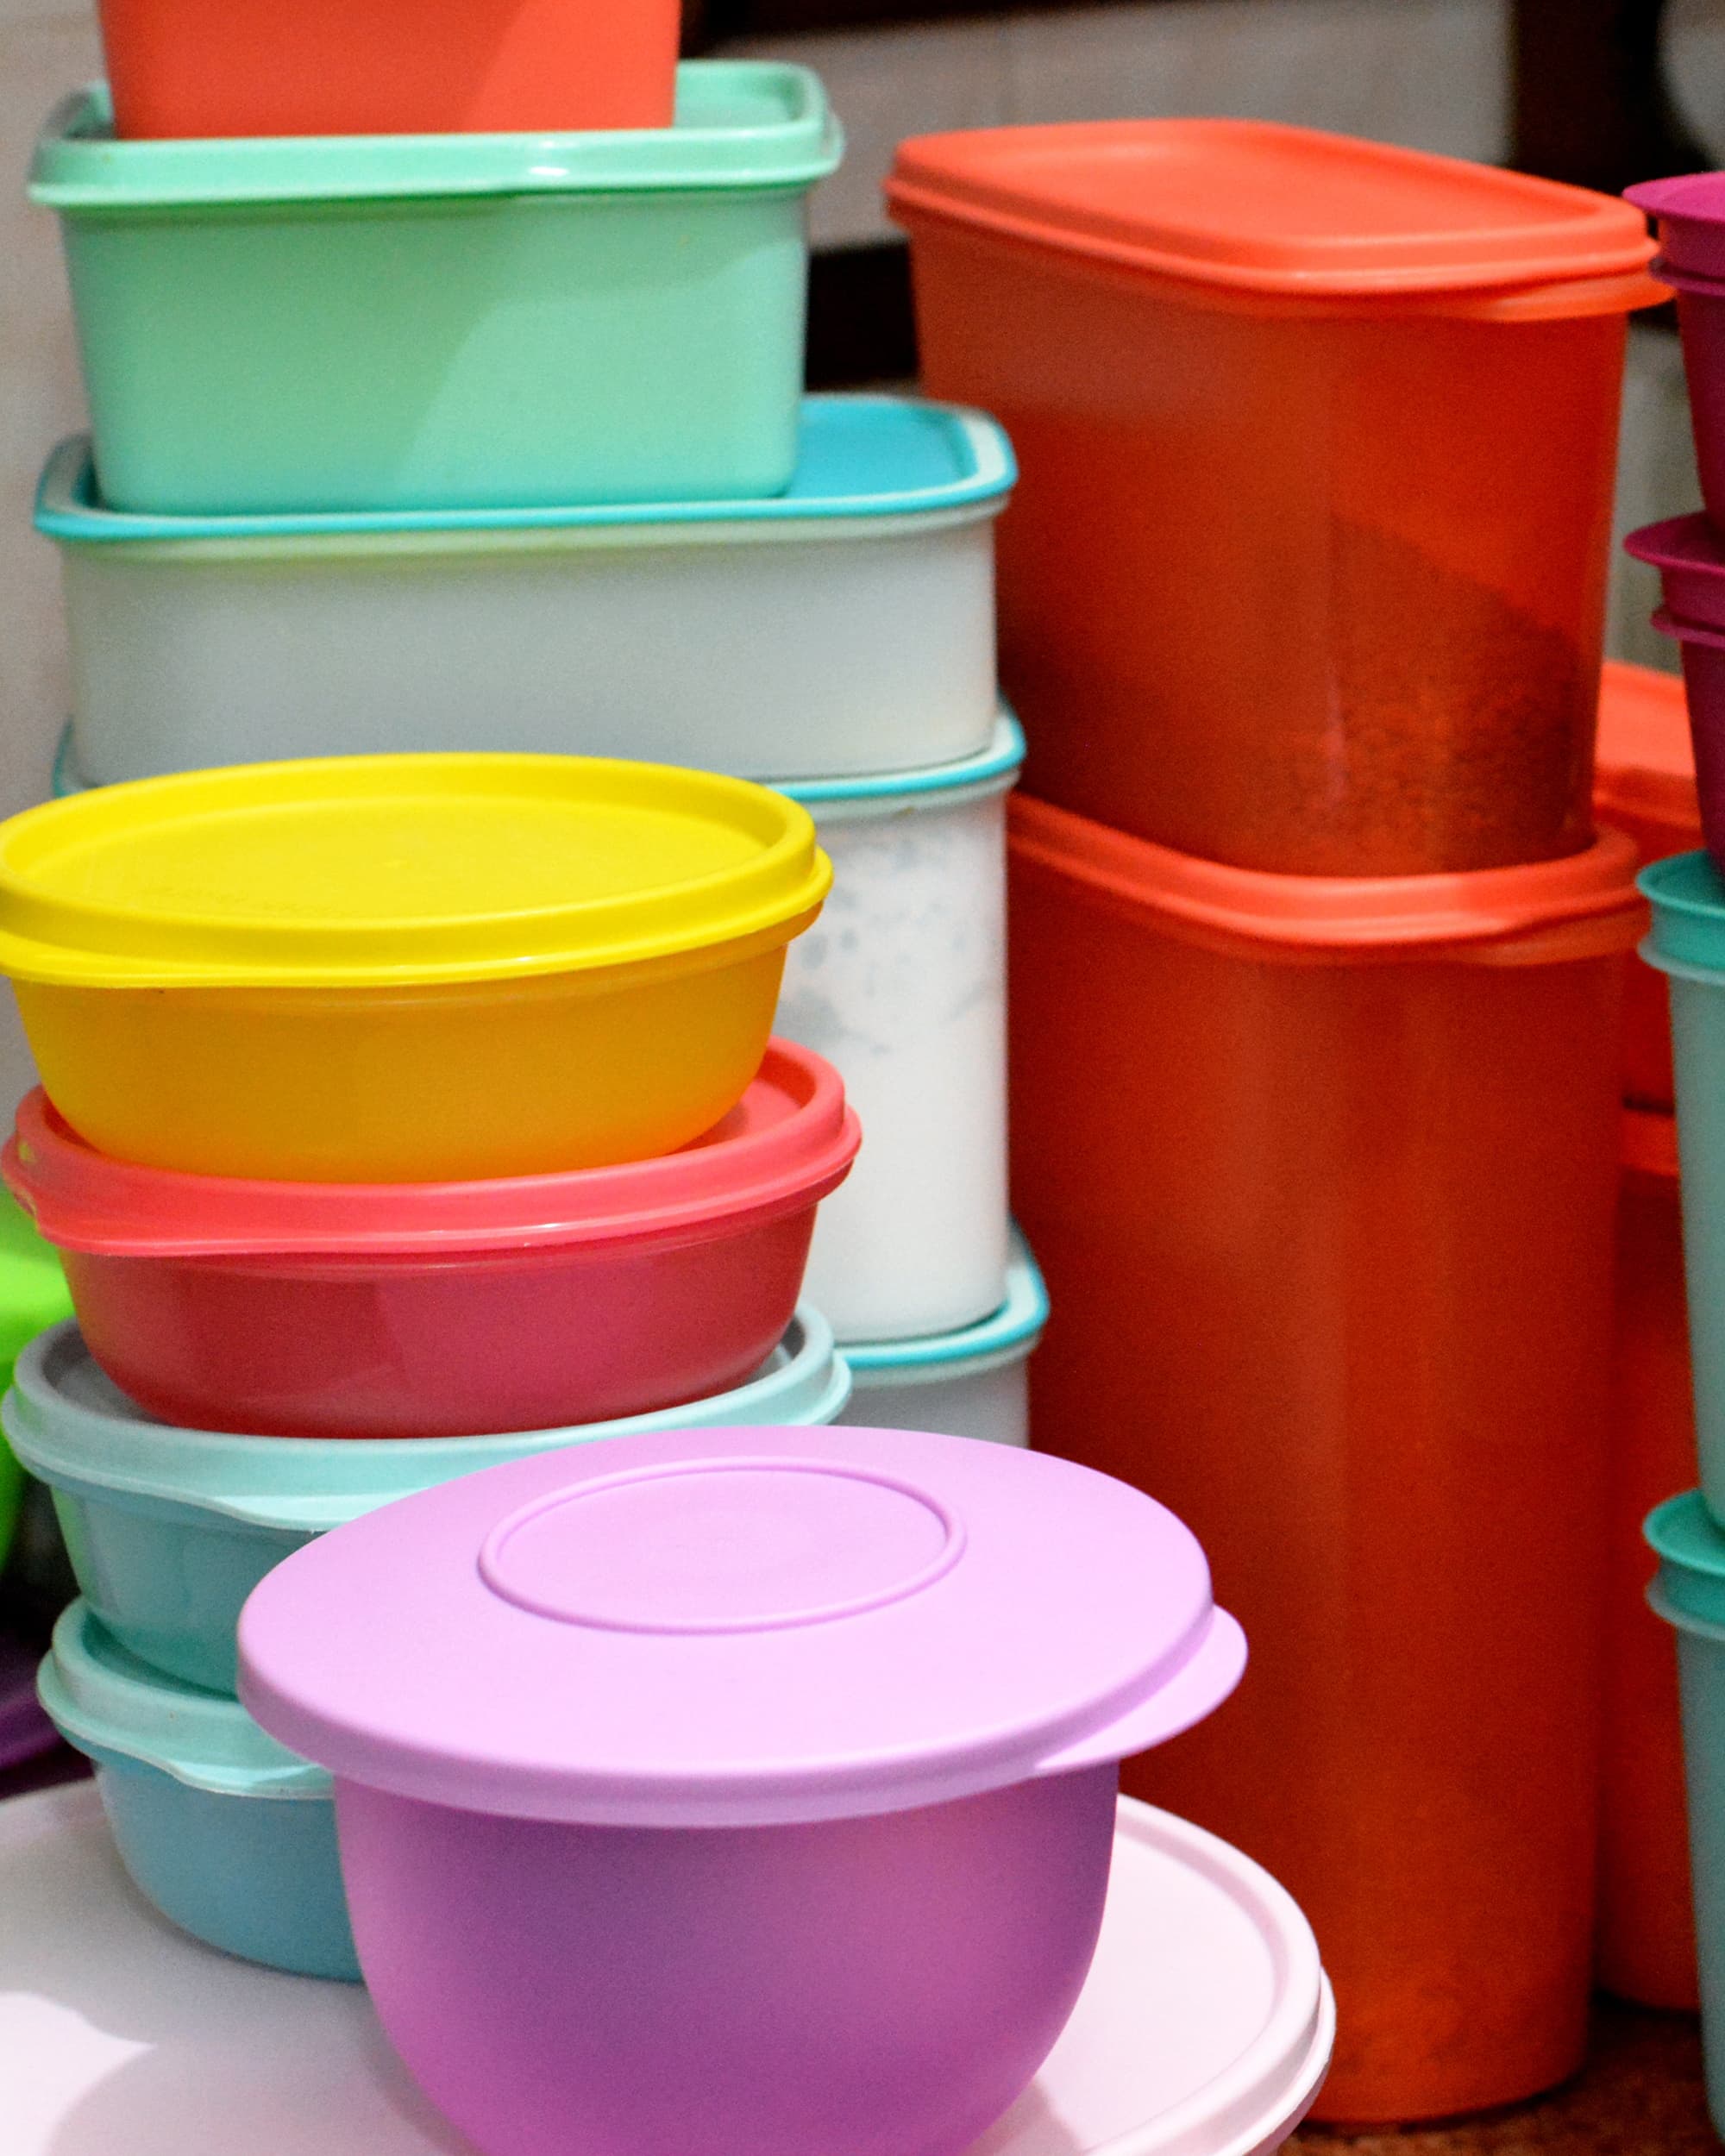 Is Tupperware Going Out of Business?